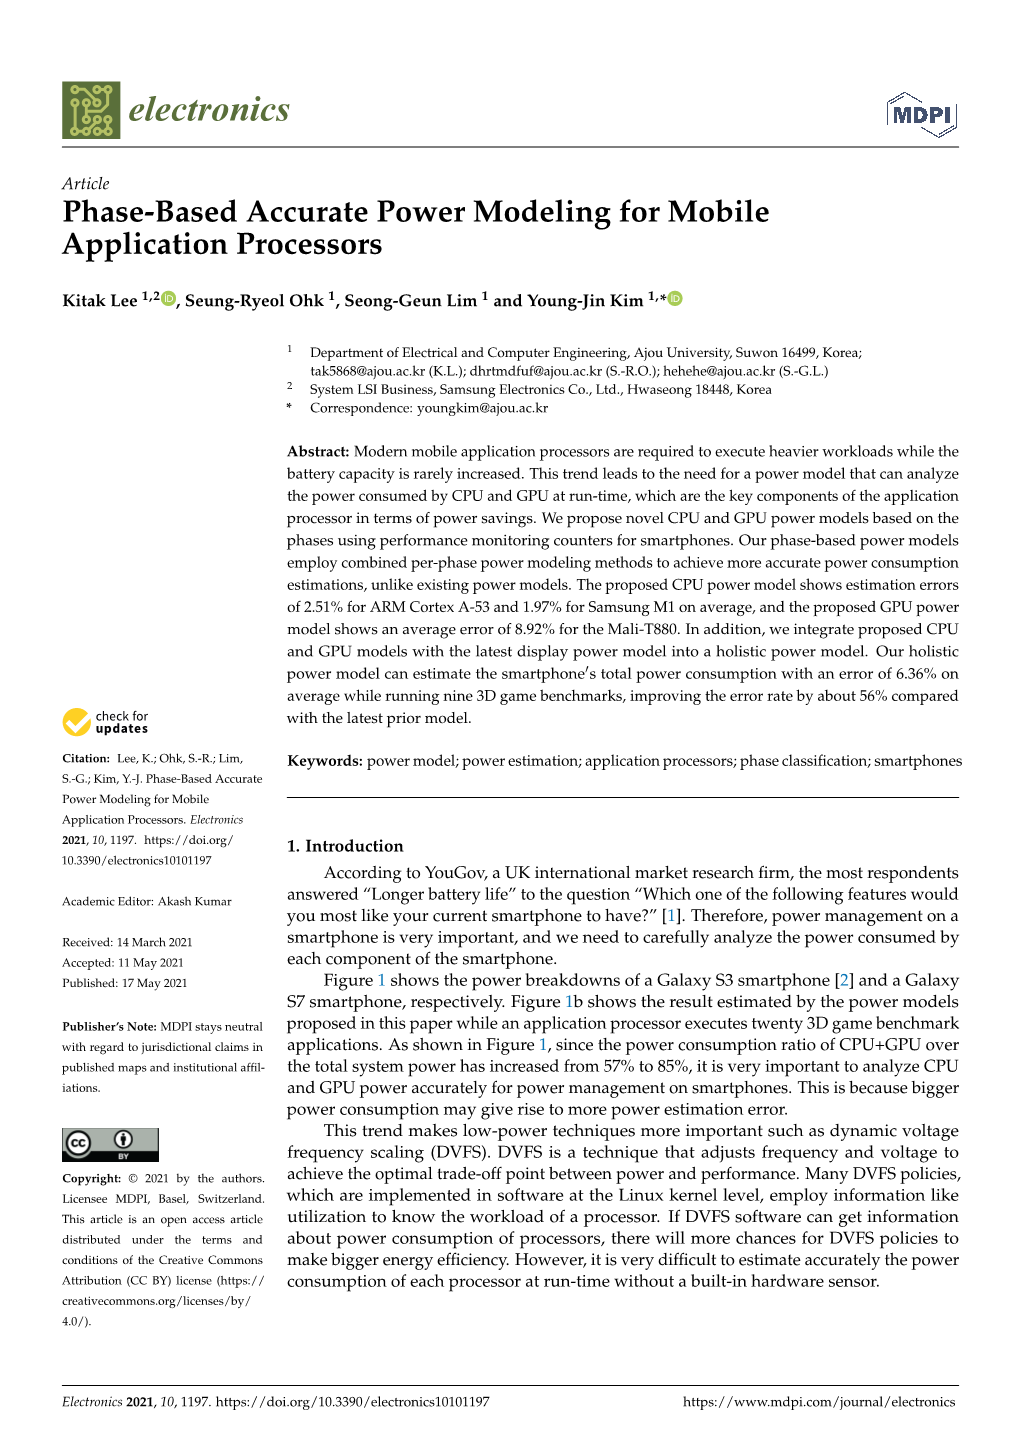 Phase-Based Accurate Power Modeling for Mobile Application Processors